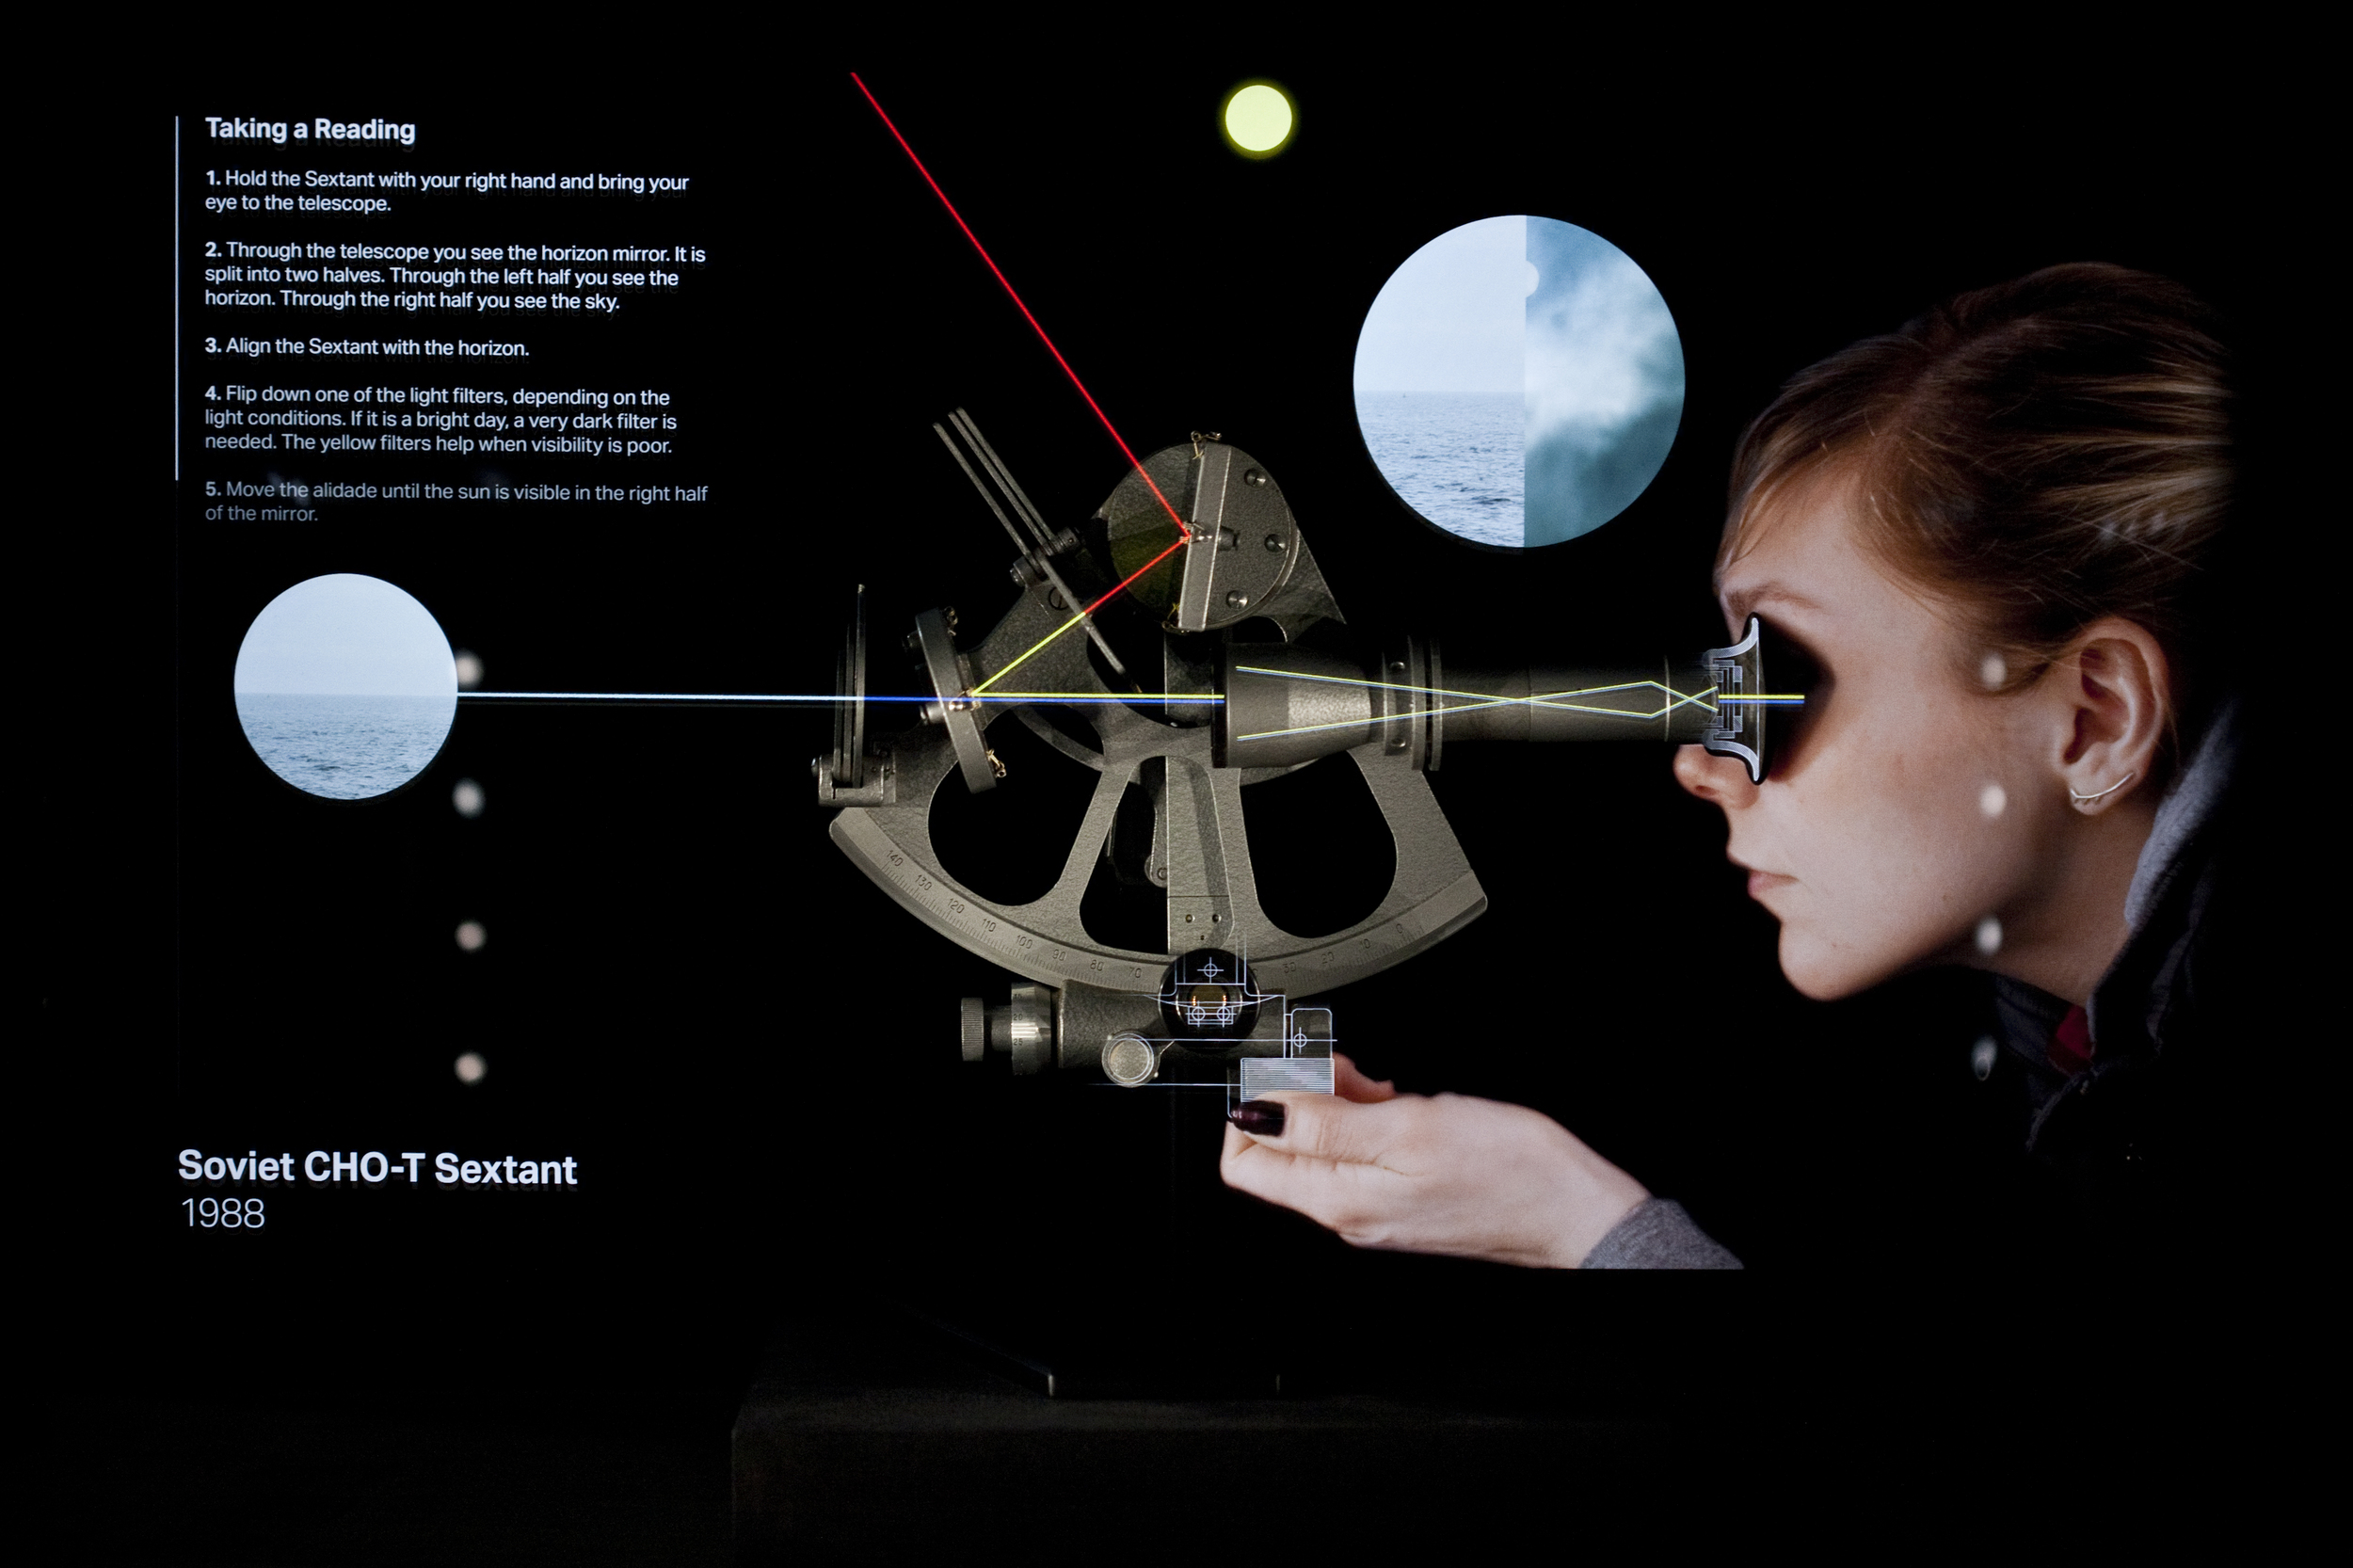 ColliderCase Wants to Help Bring Museums to Life Through Animated Holographics